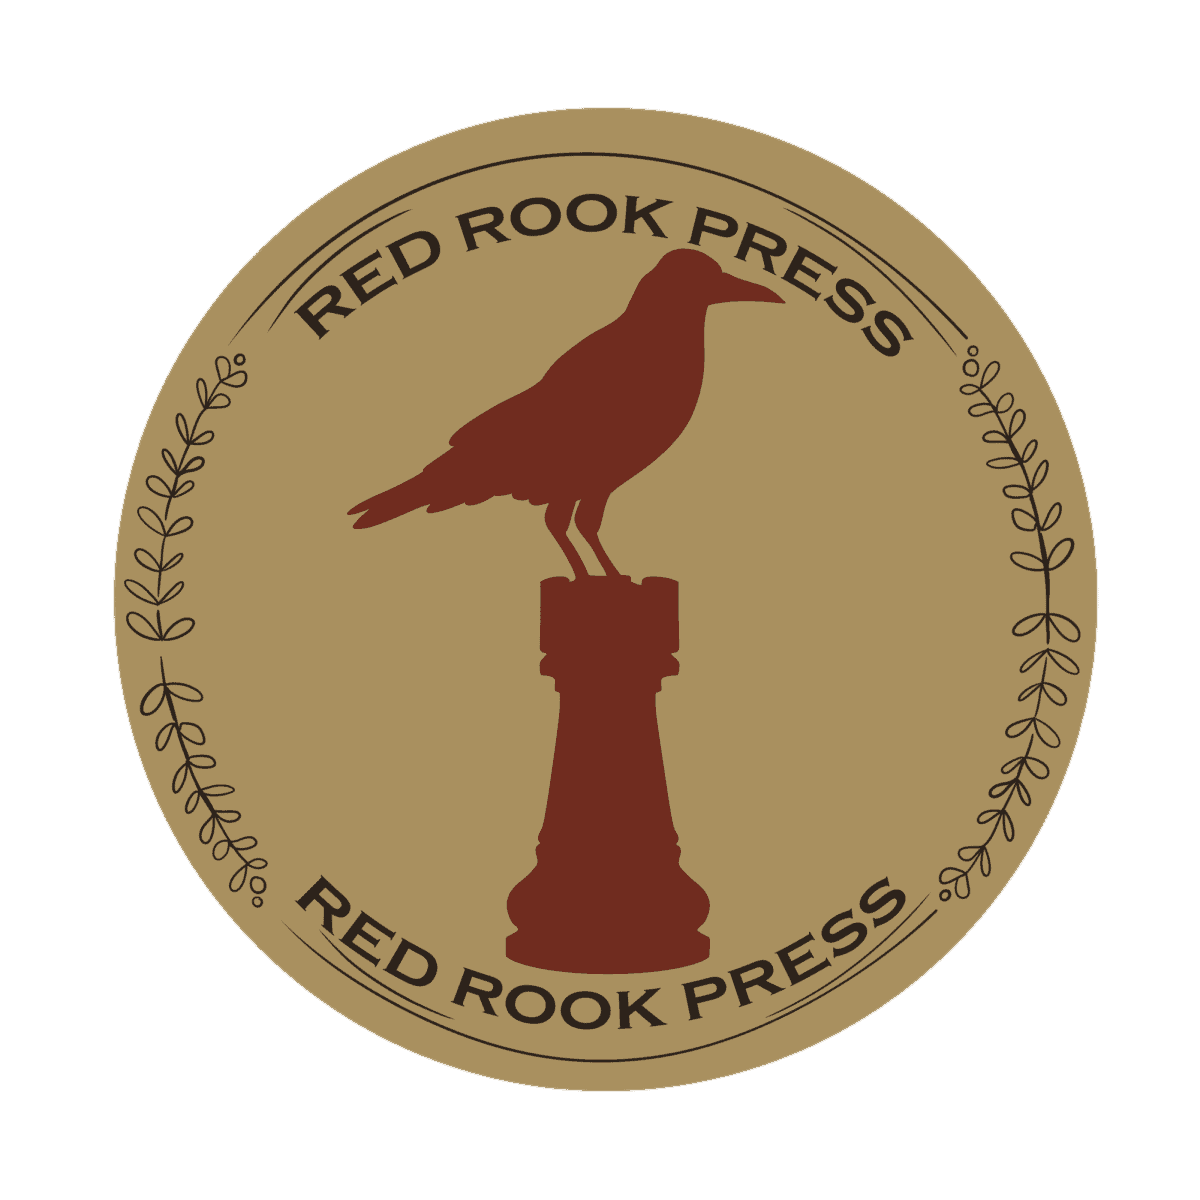 Red Rook Press empowers students to gain real world experience in publishing